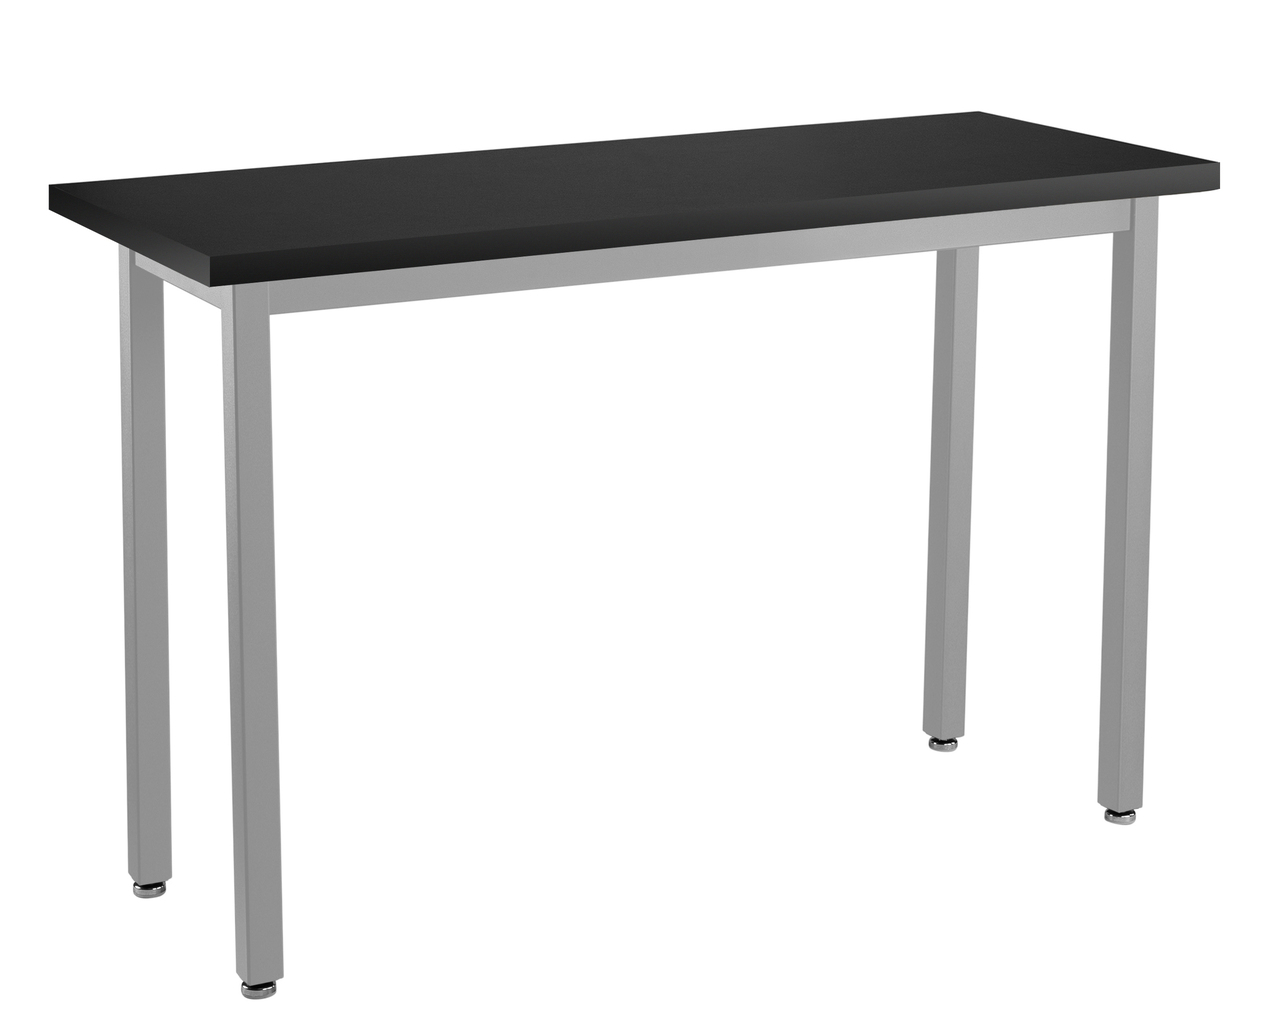 NPS Steel Science Lab Table -  18" x 60" -  Chemical Resistant Top - Black Surface Color